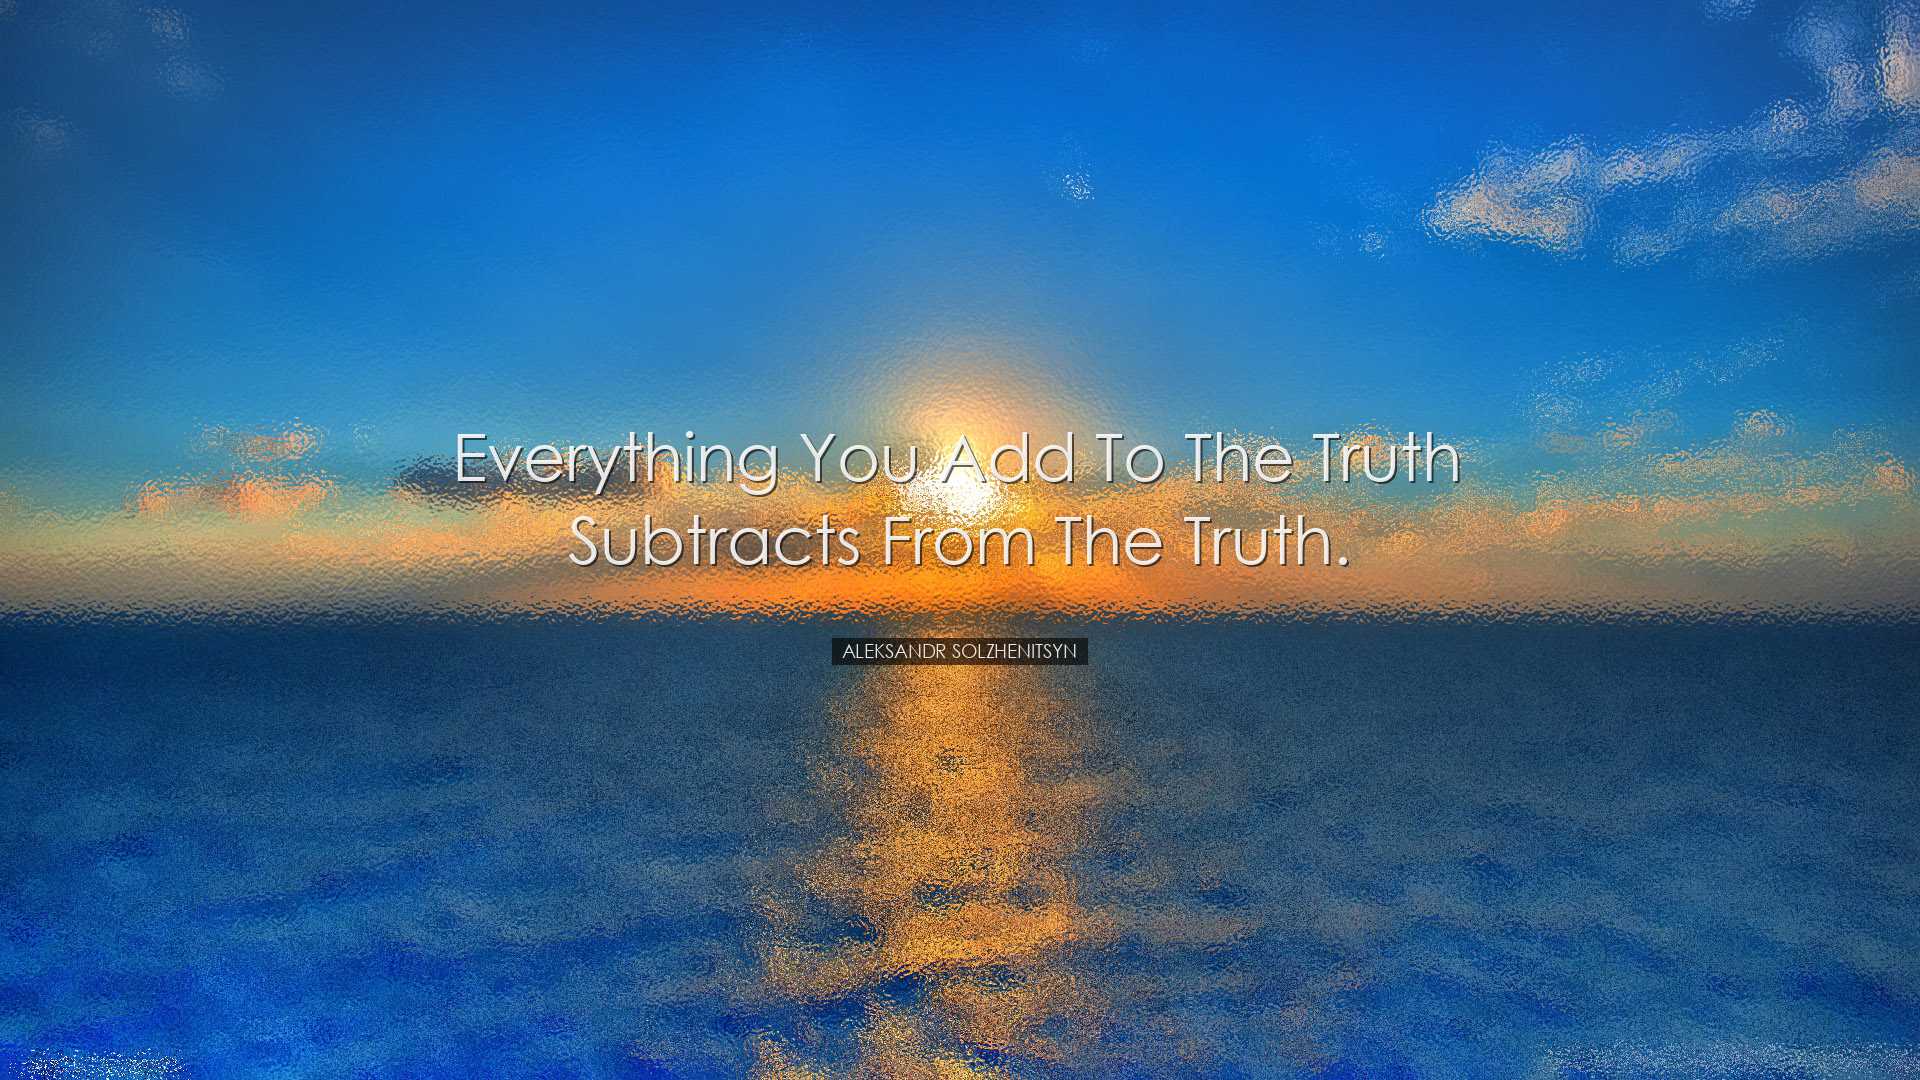 Everything you add to the truth subtracts from the truth. - Aleksa